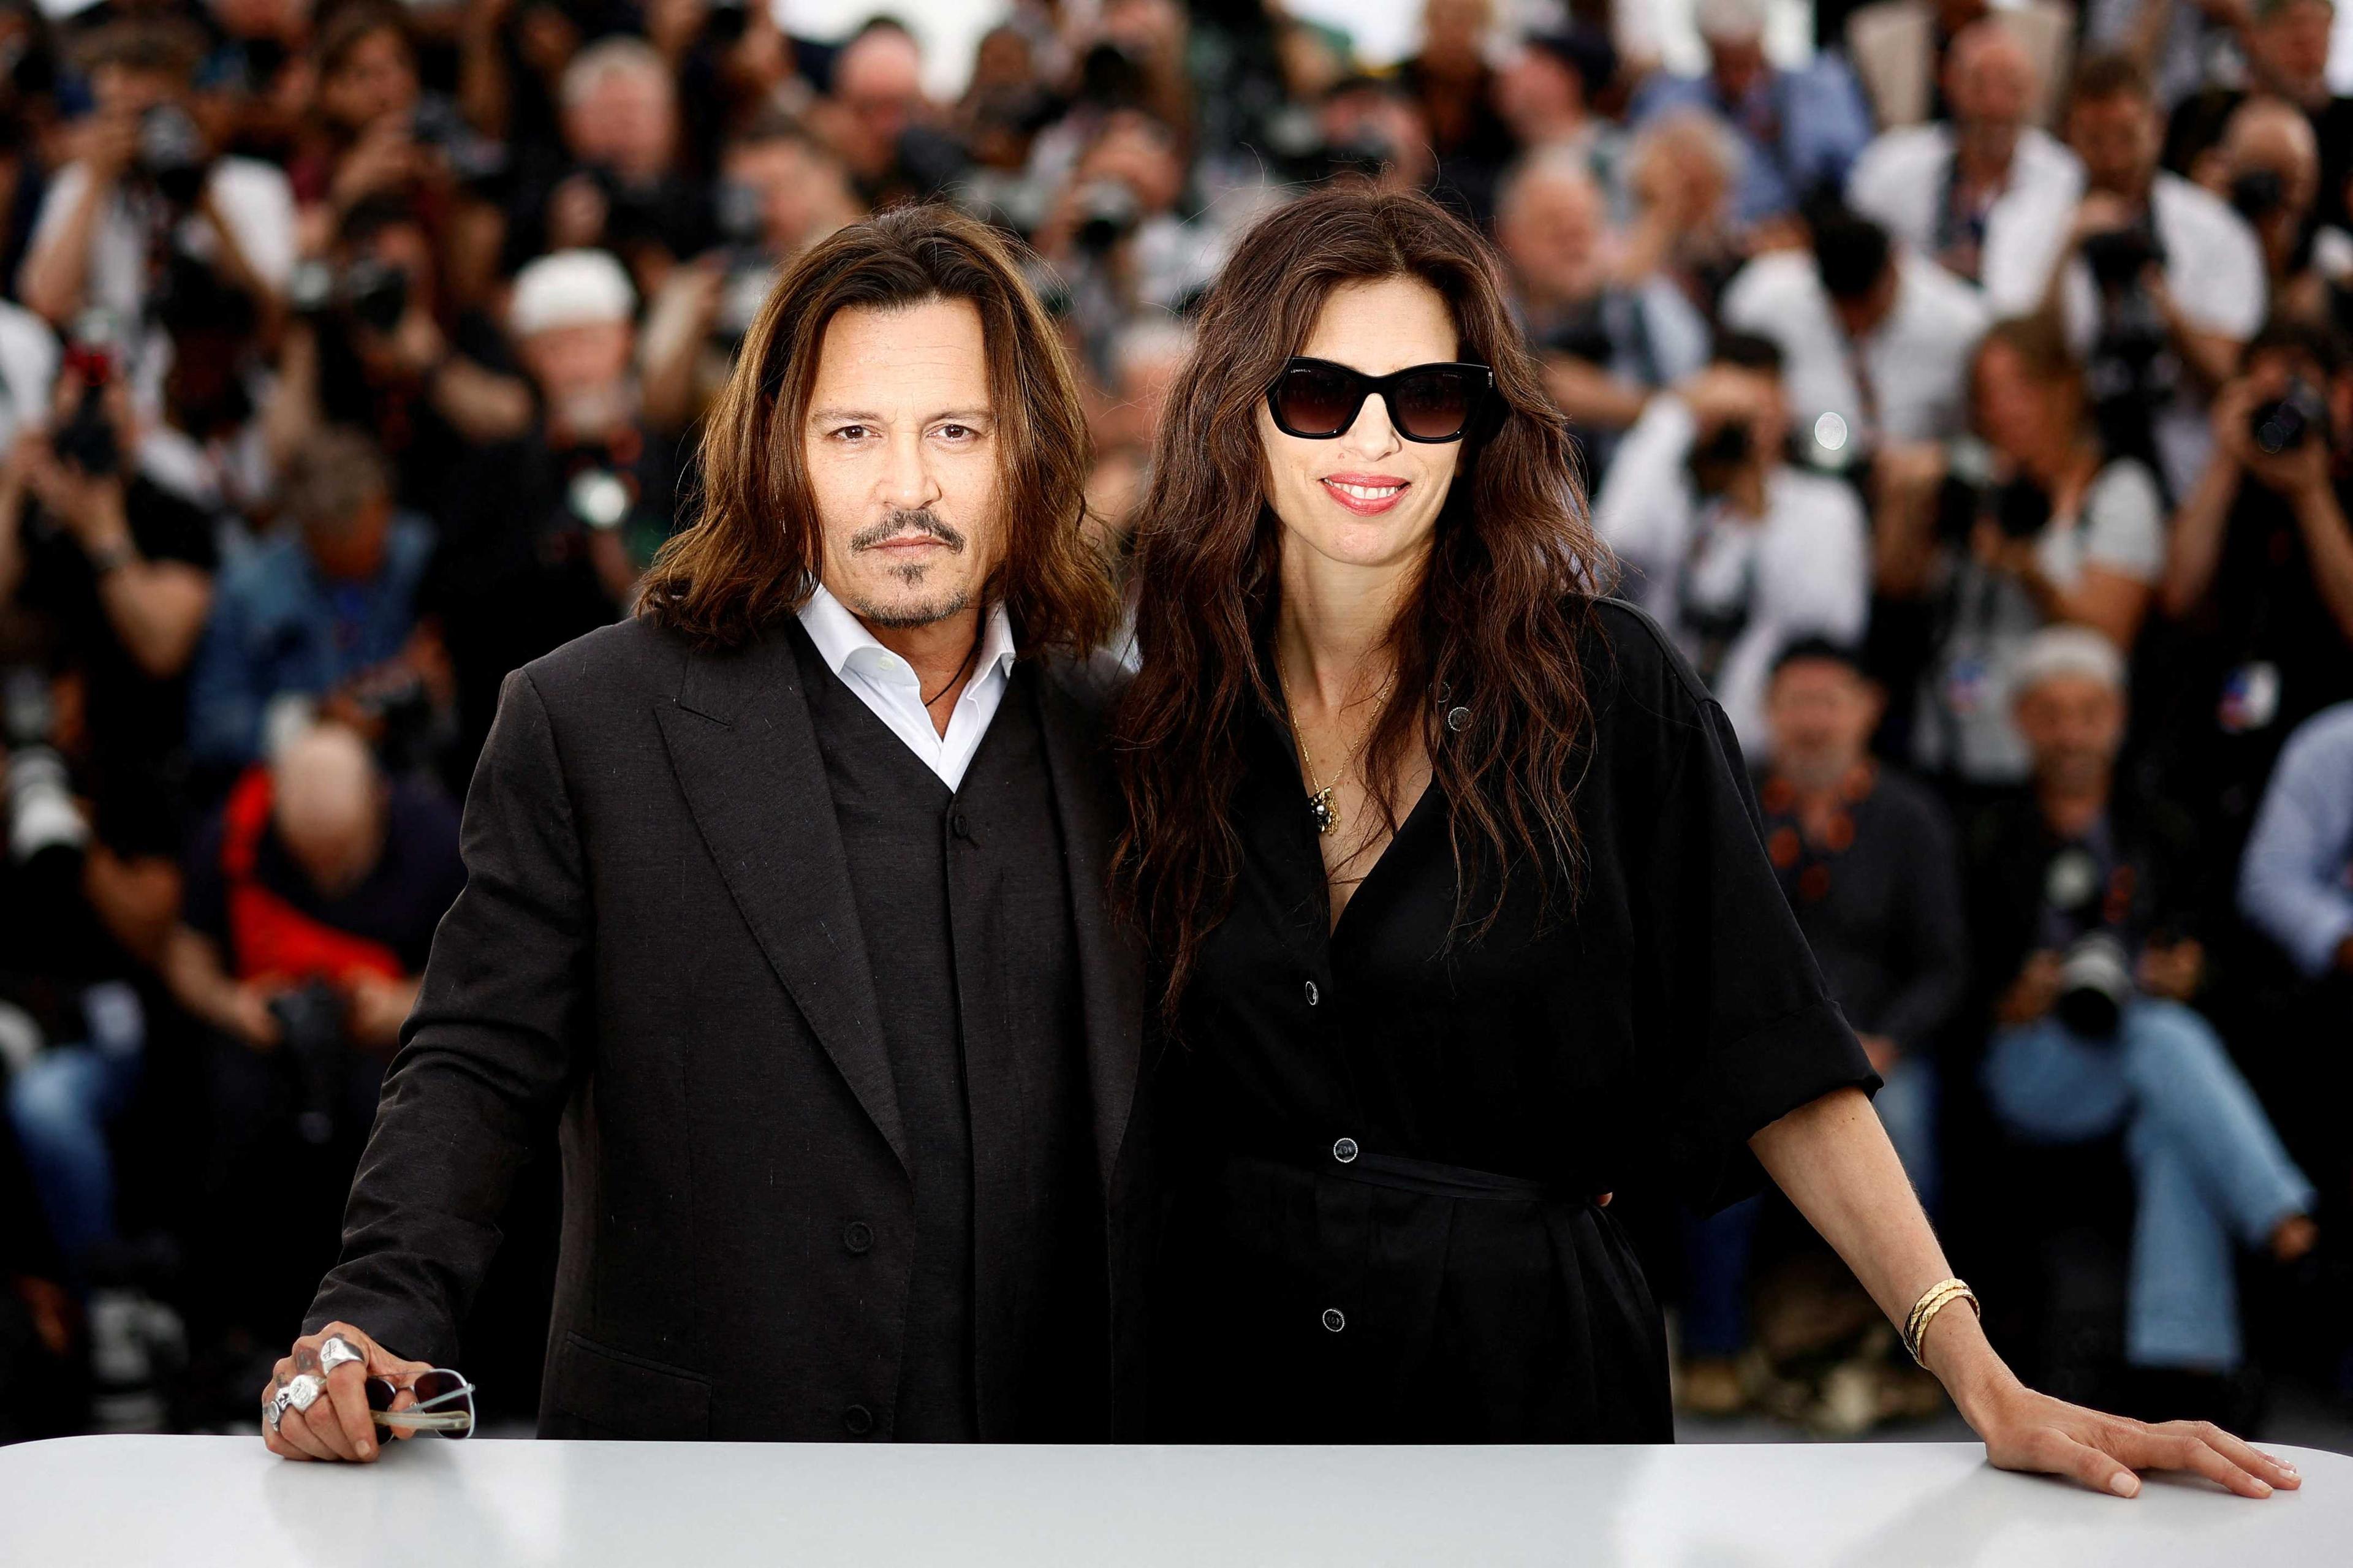 Director Maiwenn and cast member Johnny Depp pose at the 76th Cannes Film Festival in Cannes, France, May 17. Photo: Reuters